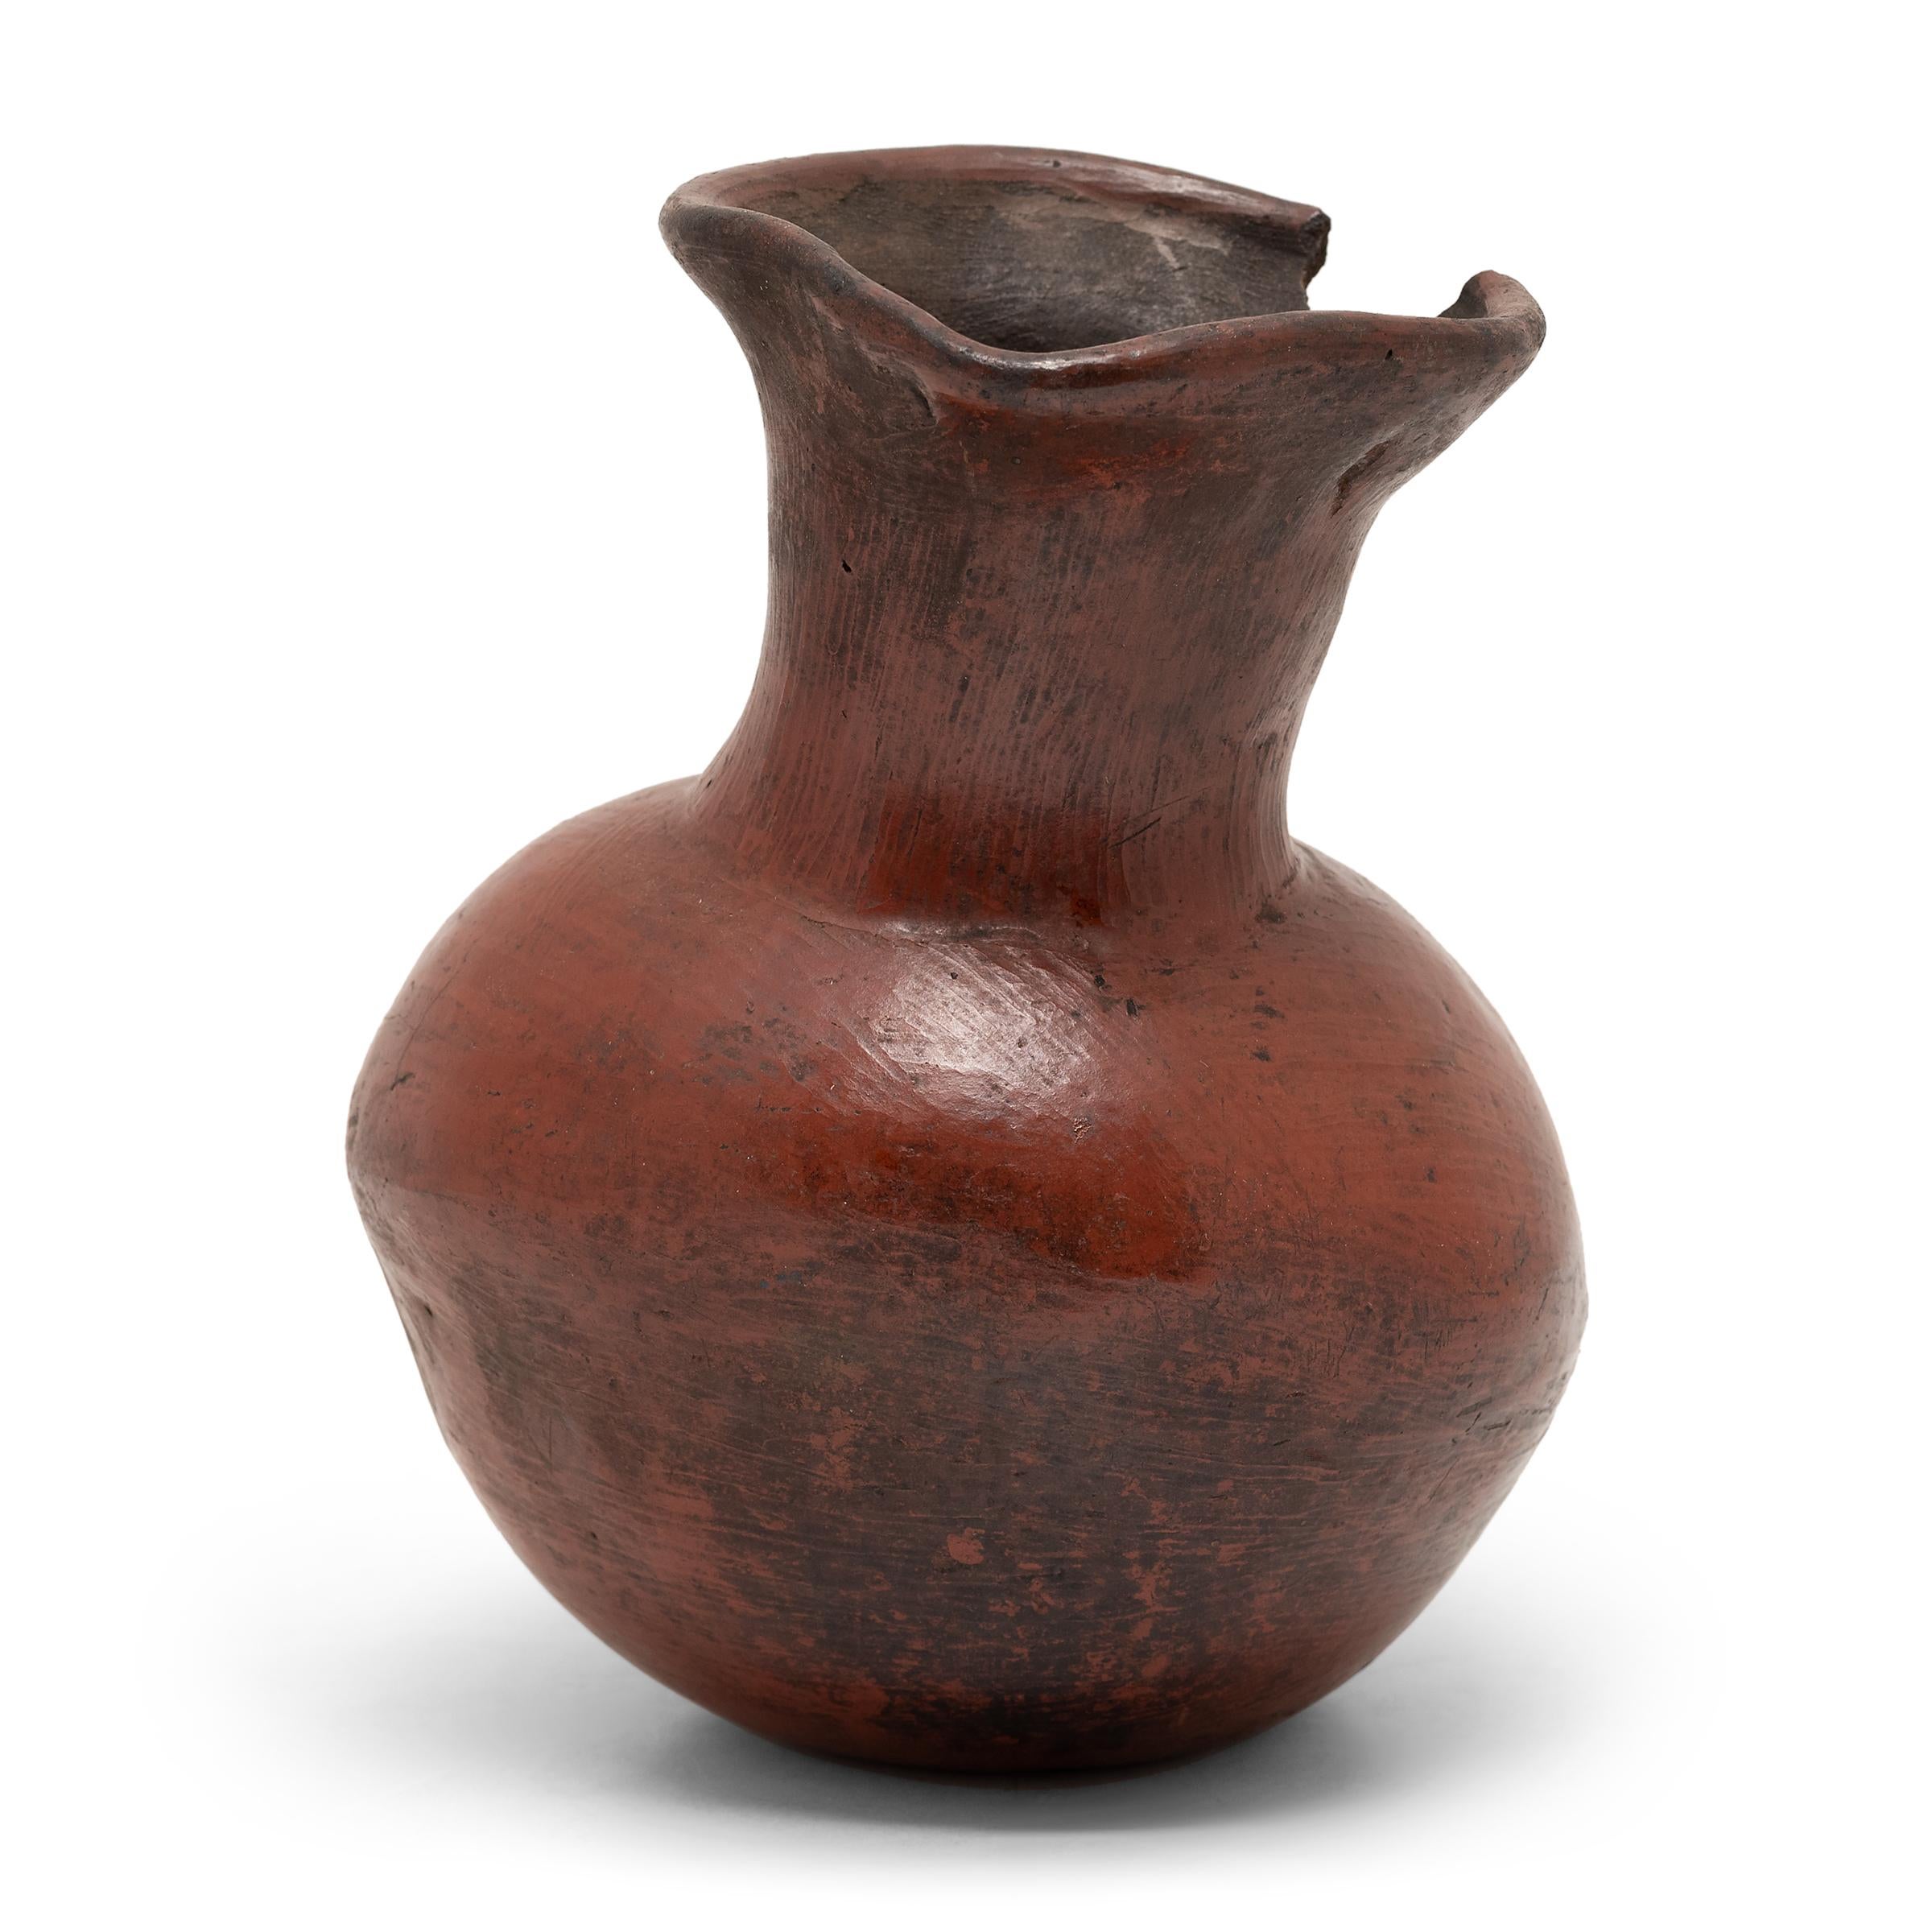 This charming ceramic vessel is attributed to the Colima region of Western Mexico dating back to 300 AD. The vessel boasts a deep red tone and large globular body that comes to a point, mimicking that of a duck, a sacred animal of the Colima